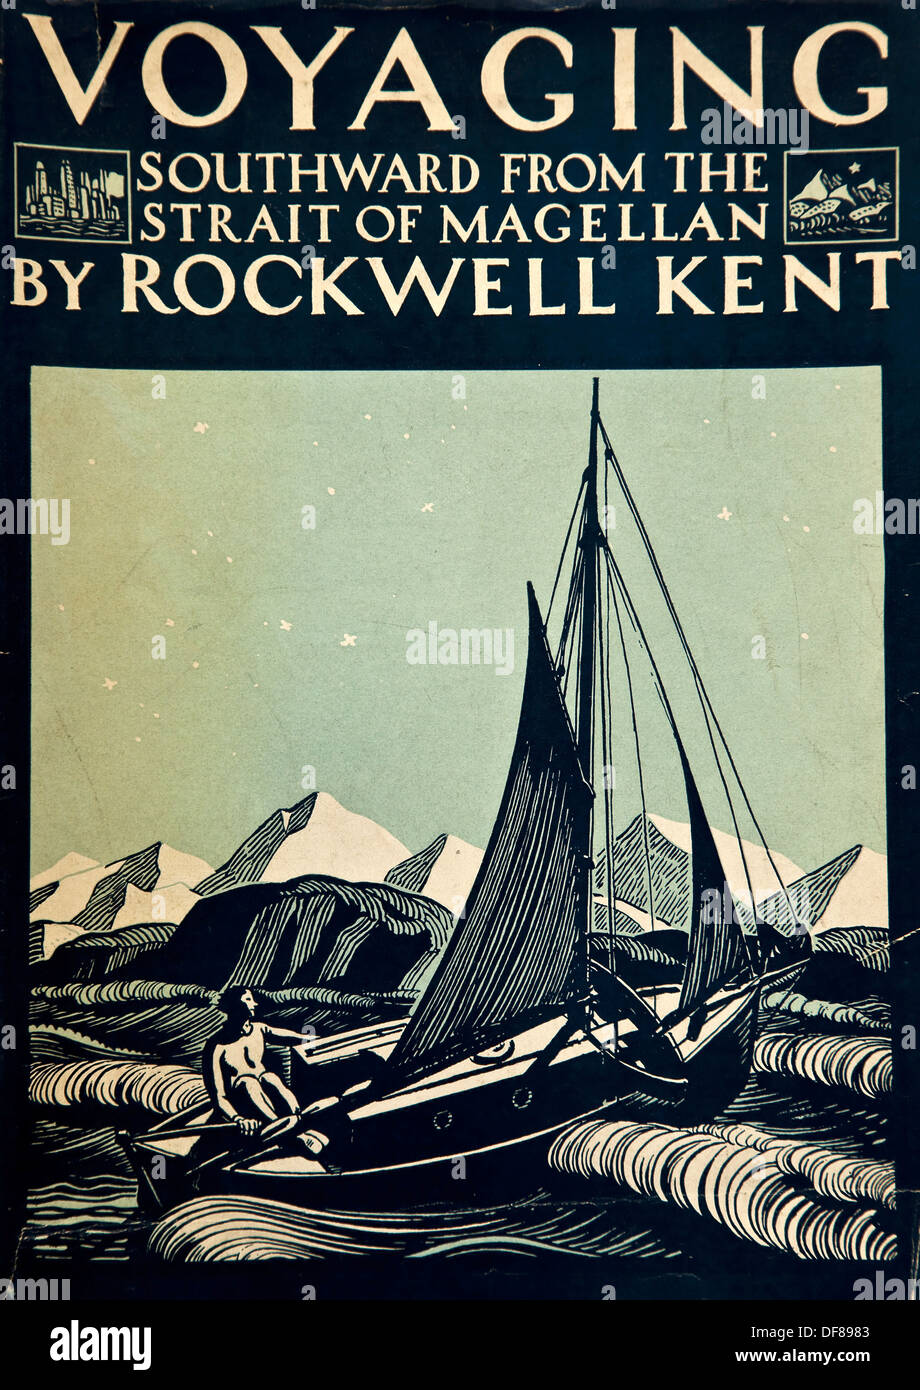 Voyaging Southward from the Strait of Magellan, Tierra del Fuego, by Rockwell Kent, 1924 Stock Photo